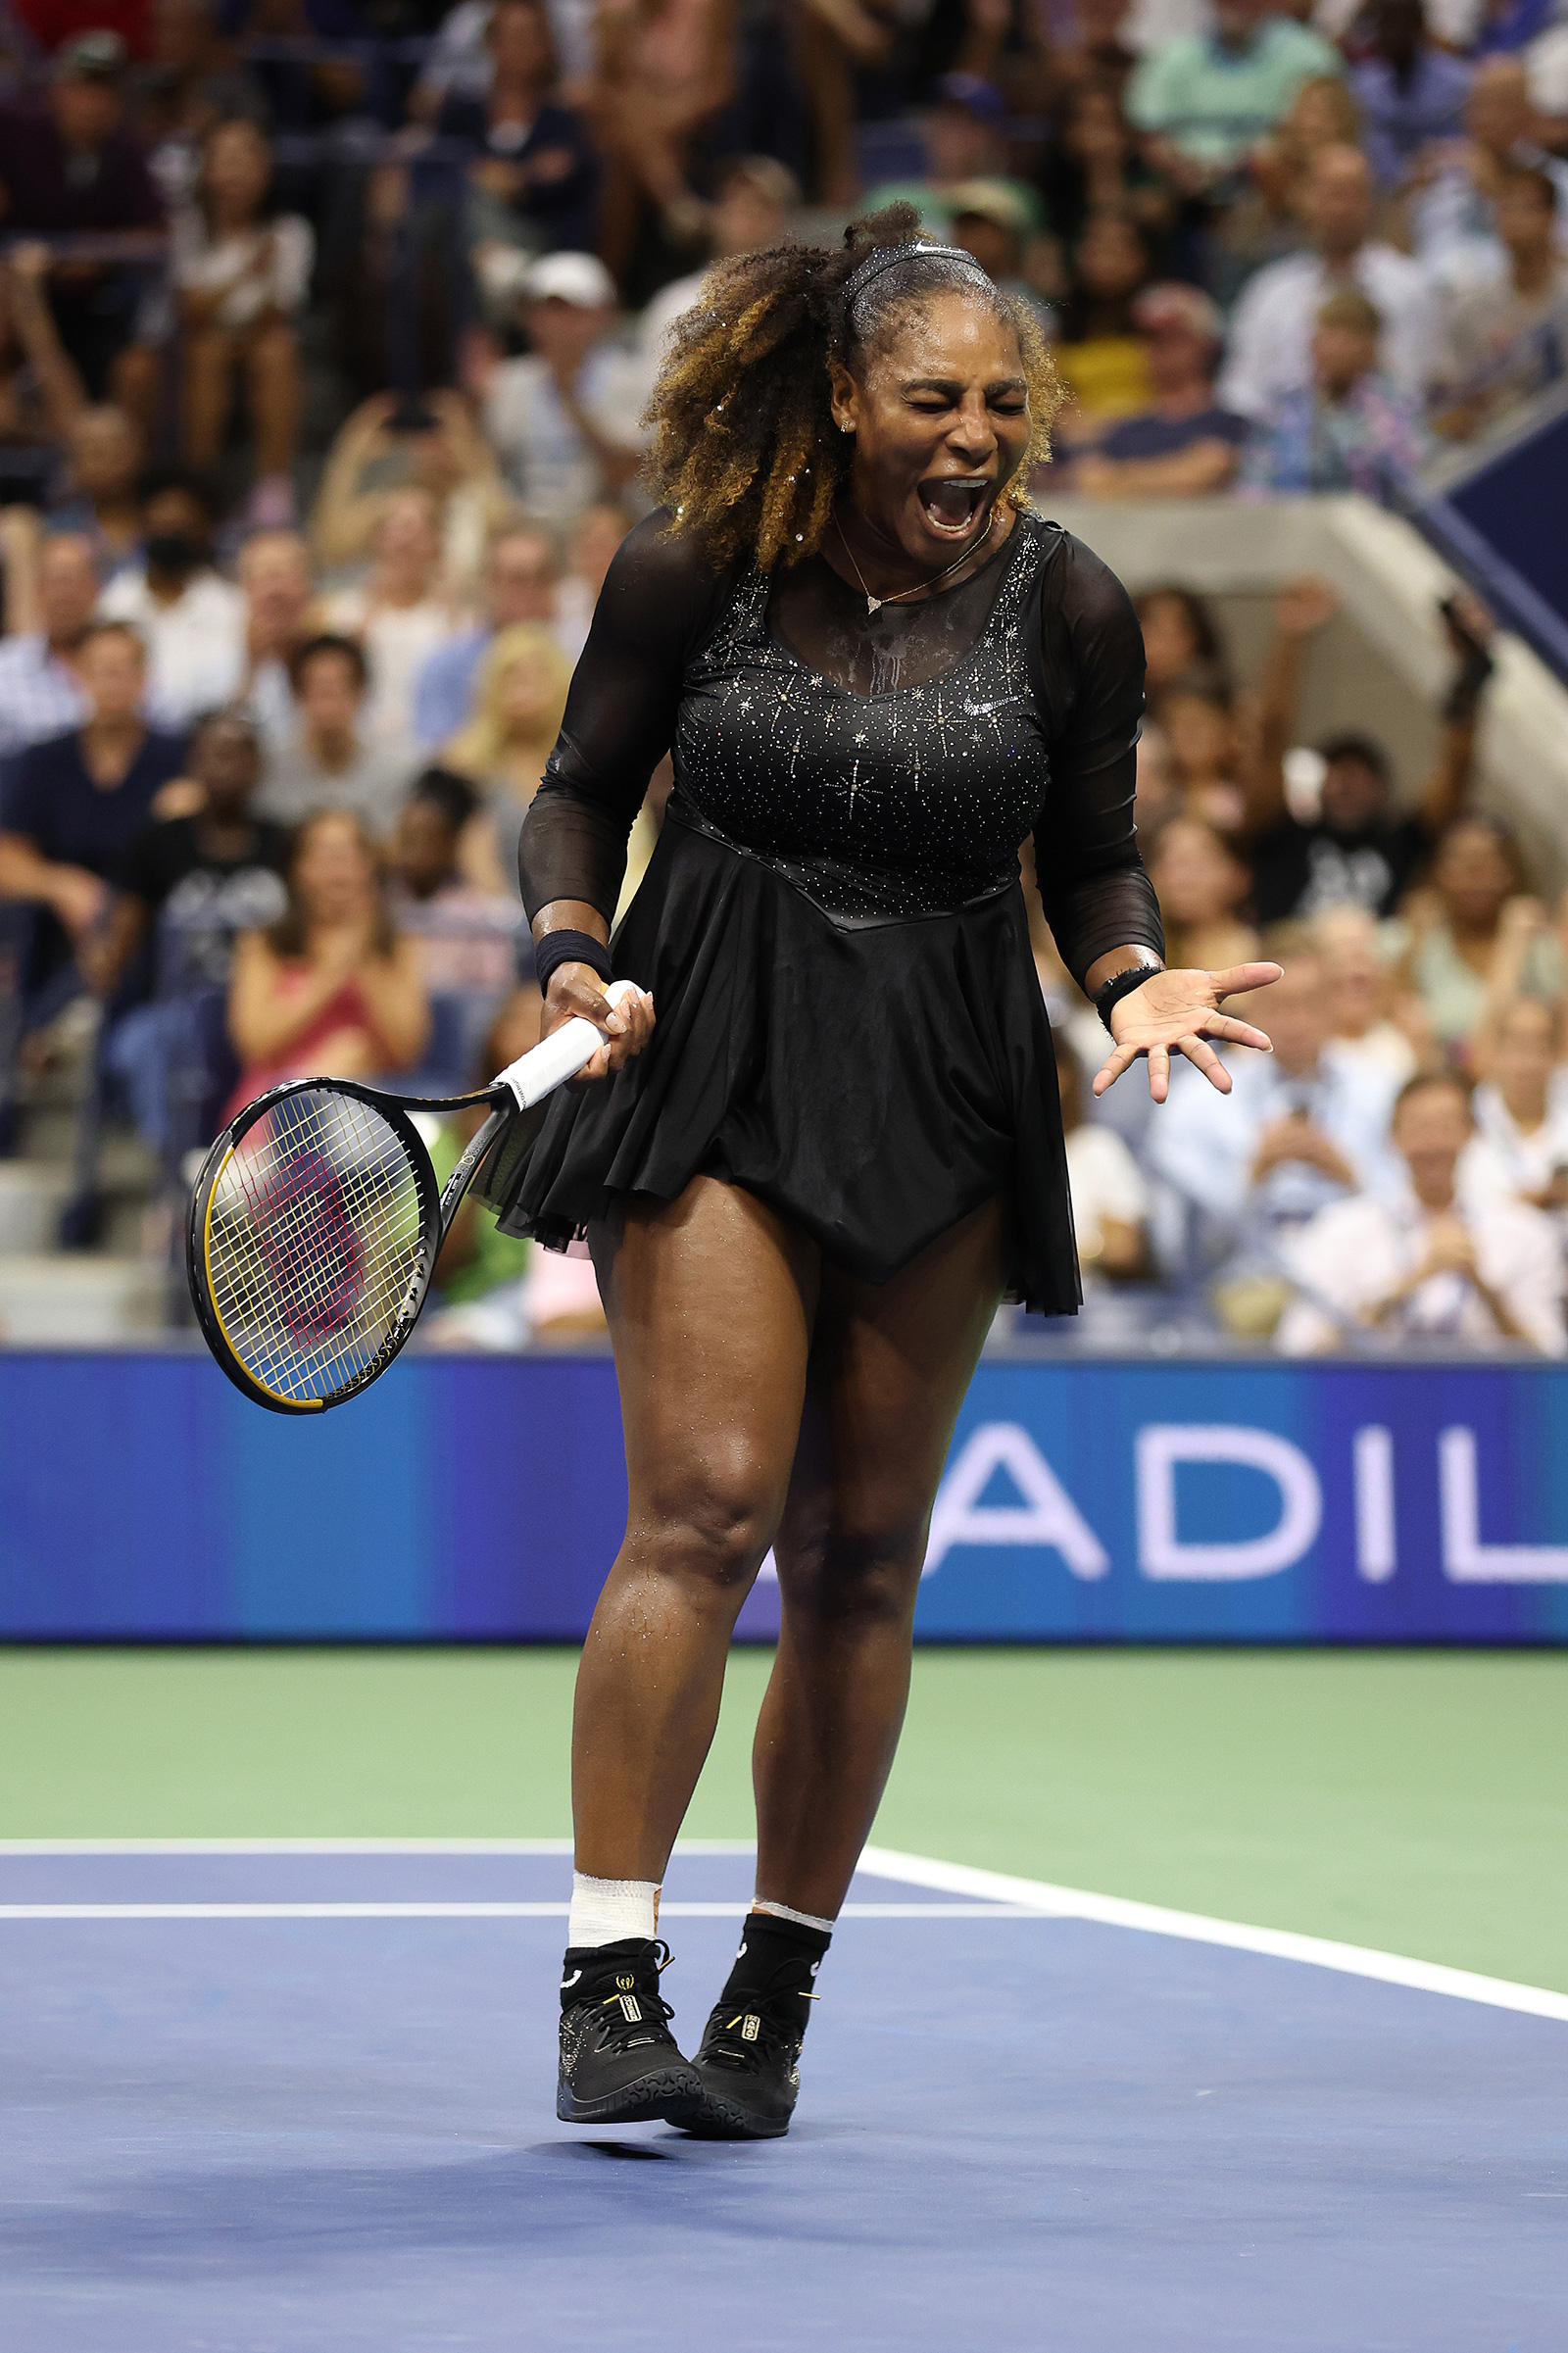 Look of the Week: Williams' bedazzled black tournament CNN Style